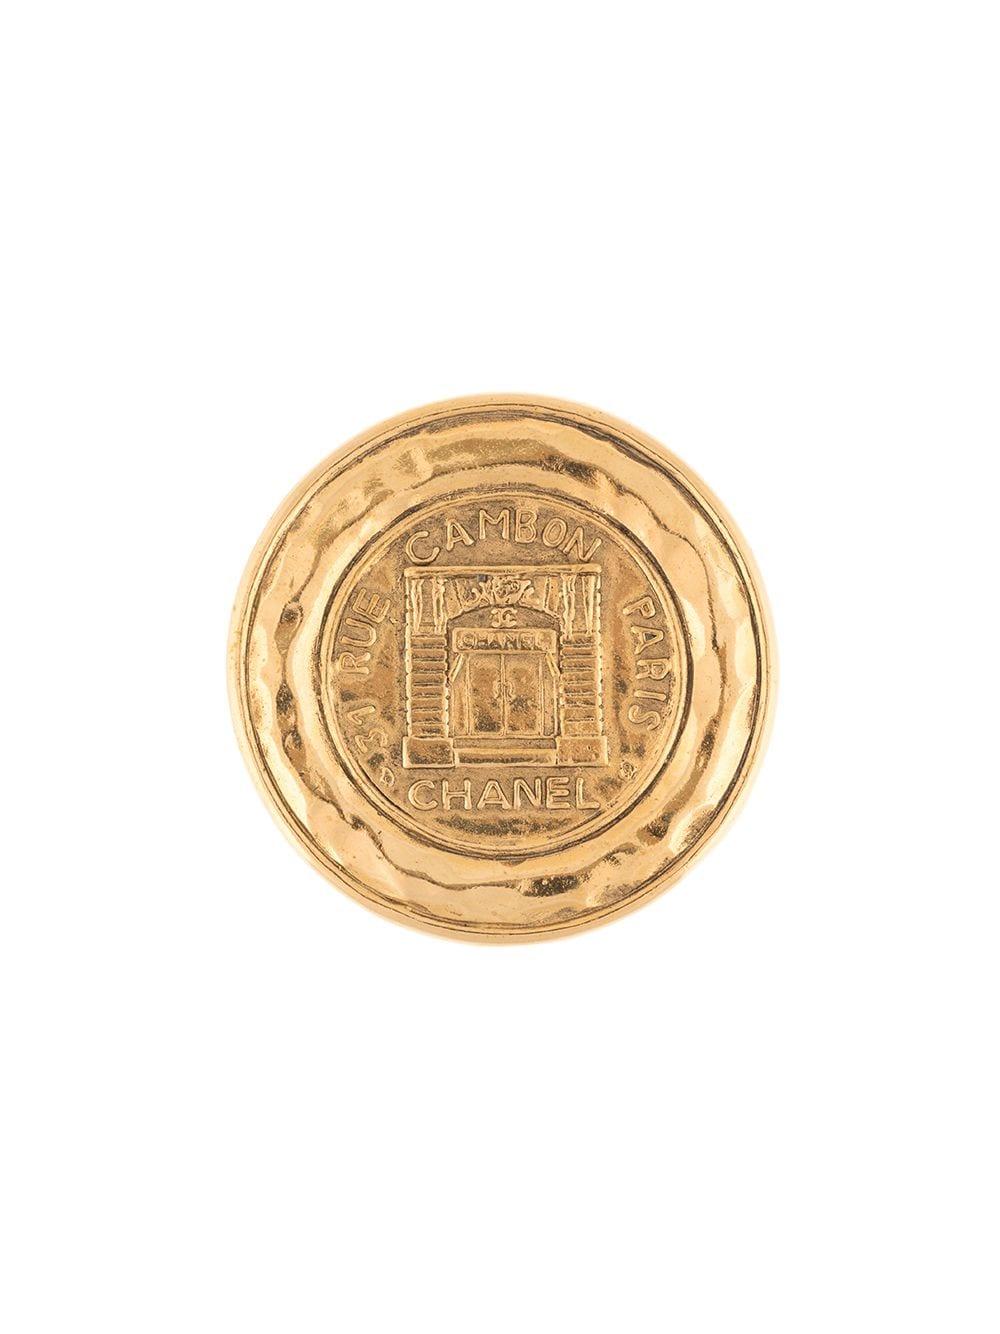 Chanel Large Gold Tone Rue Cambon Brooch For Sale 1